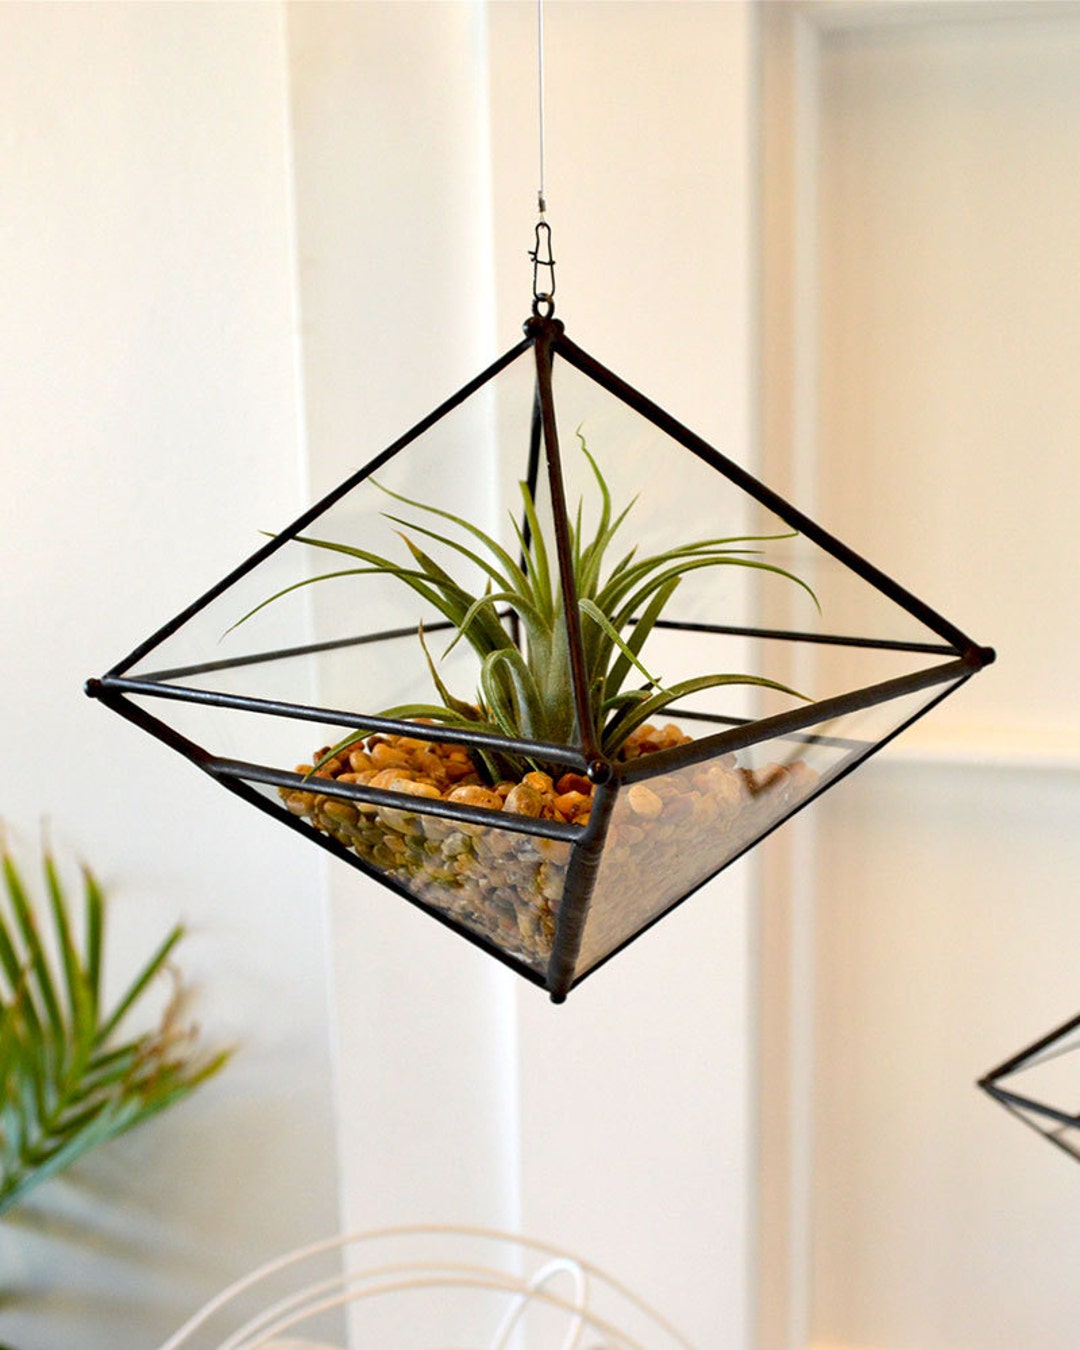 Prairie Style Inspired Pyramid Air Plant Planter Made From - Etsy